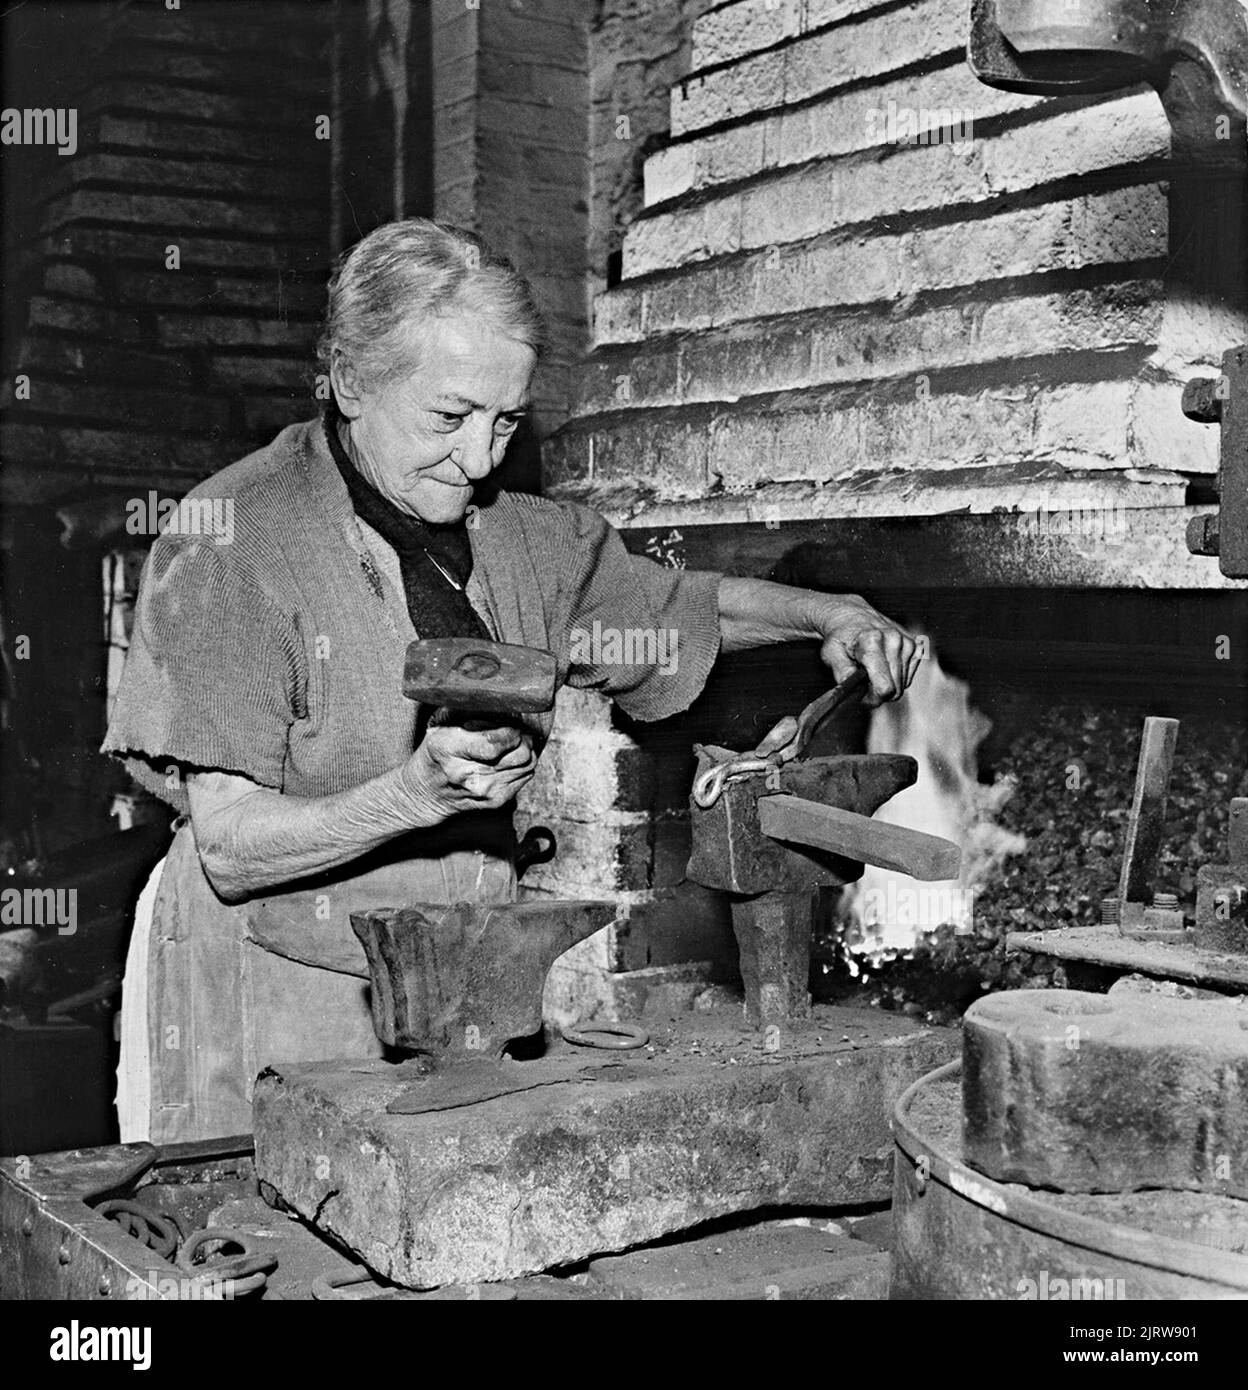 Chain making 74 year old Rachael Hickman at William Hackett's Chains in Cradley, West Midlands 1964 Stock Photo